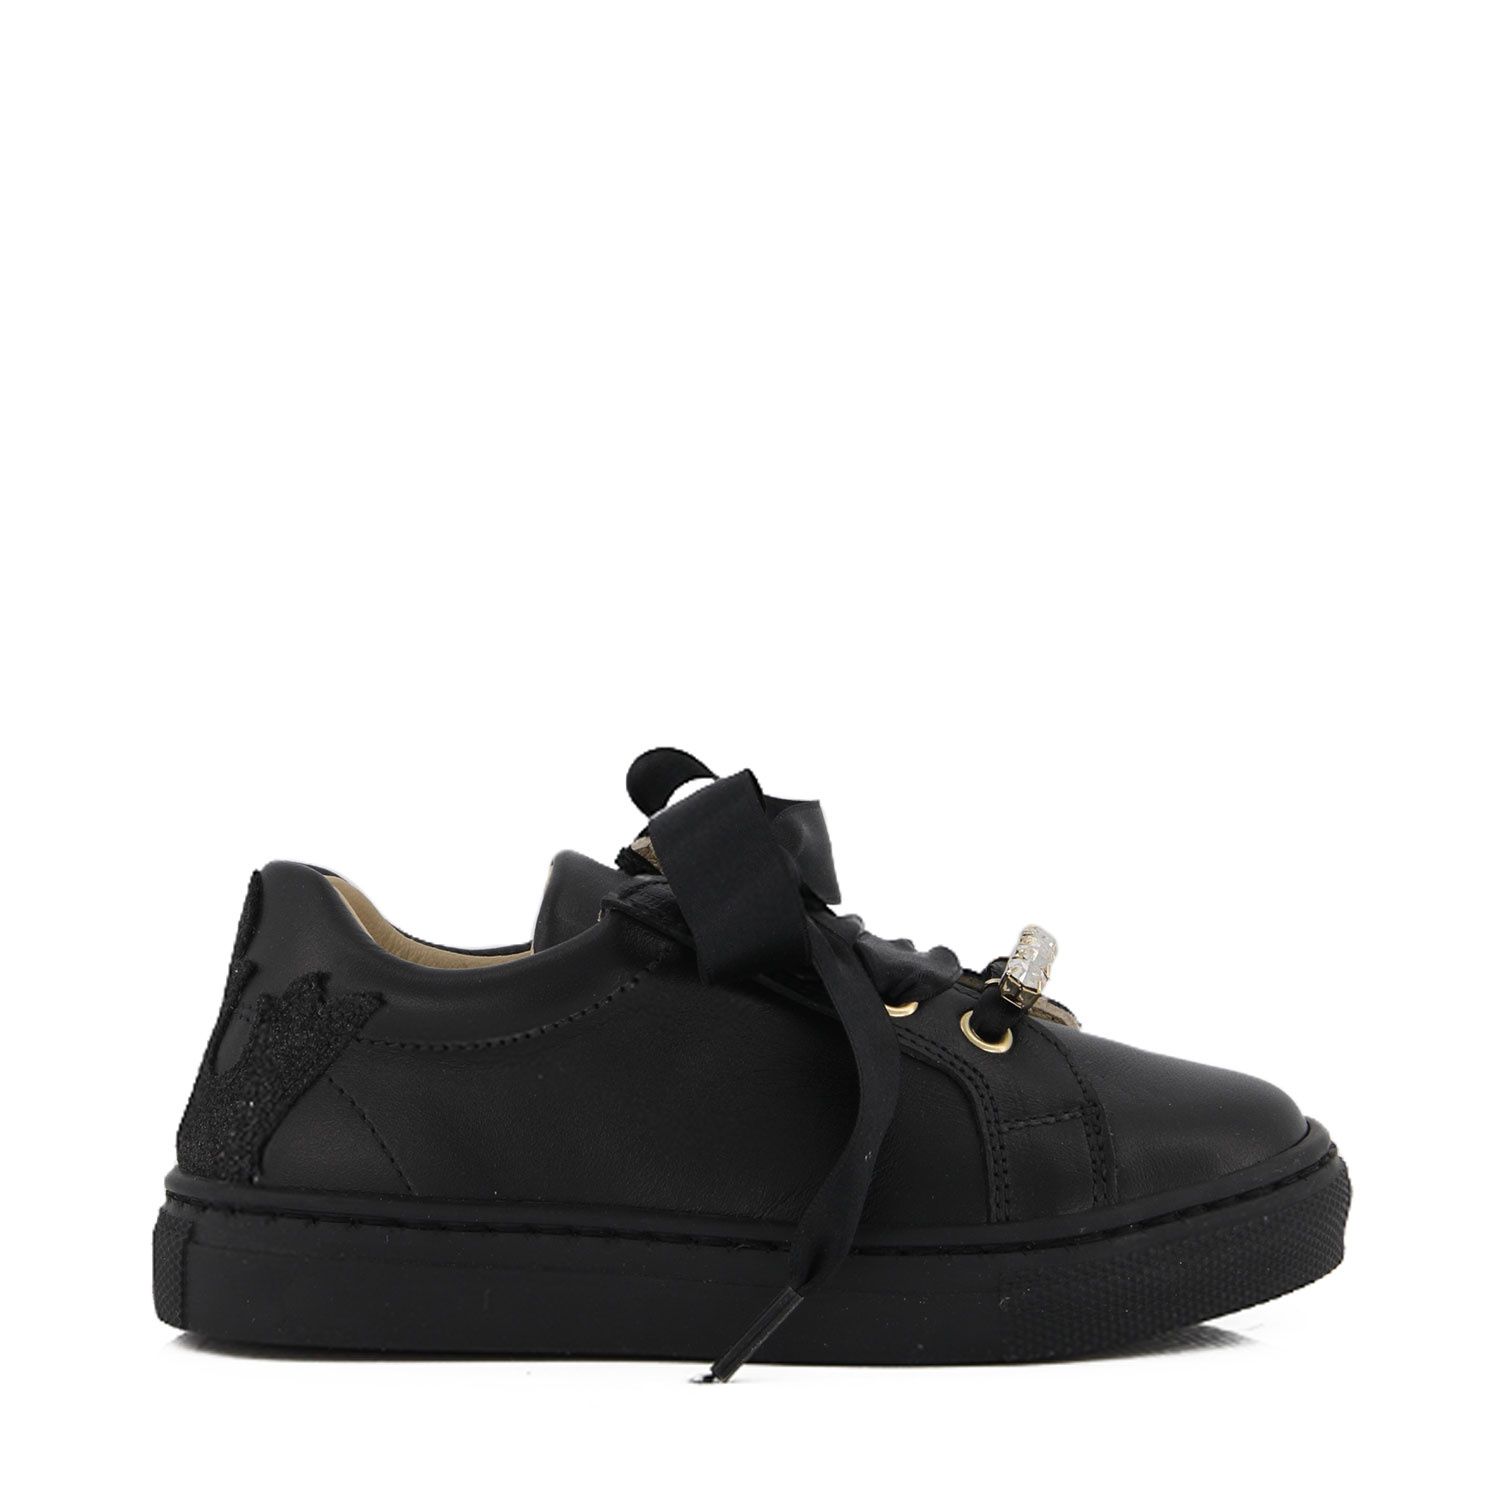 Picture of Andanines 212762 kids shoes black